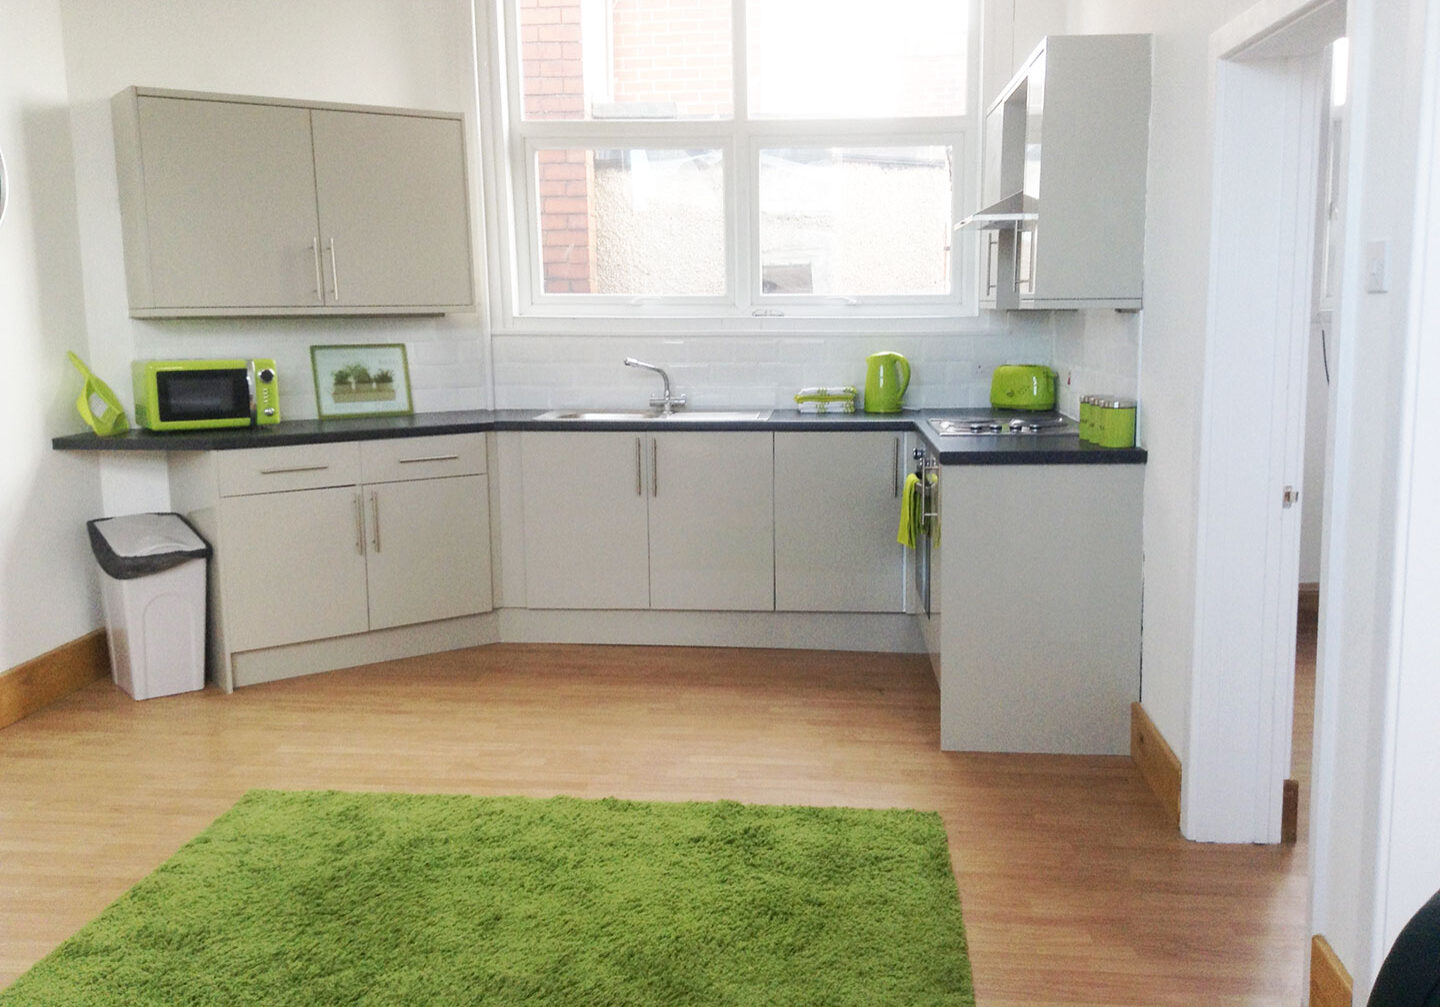 Affordable student accommodation Two bedroom student flat for rent sunderland - student accommodation